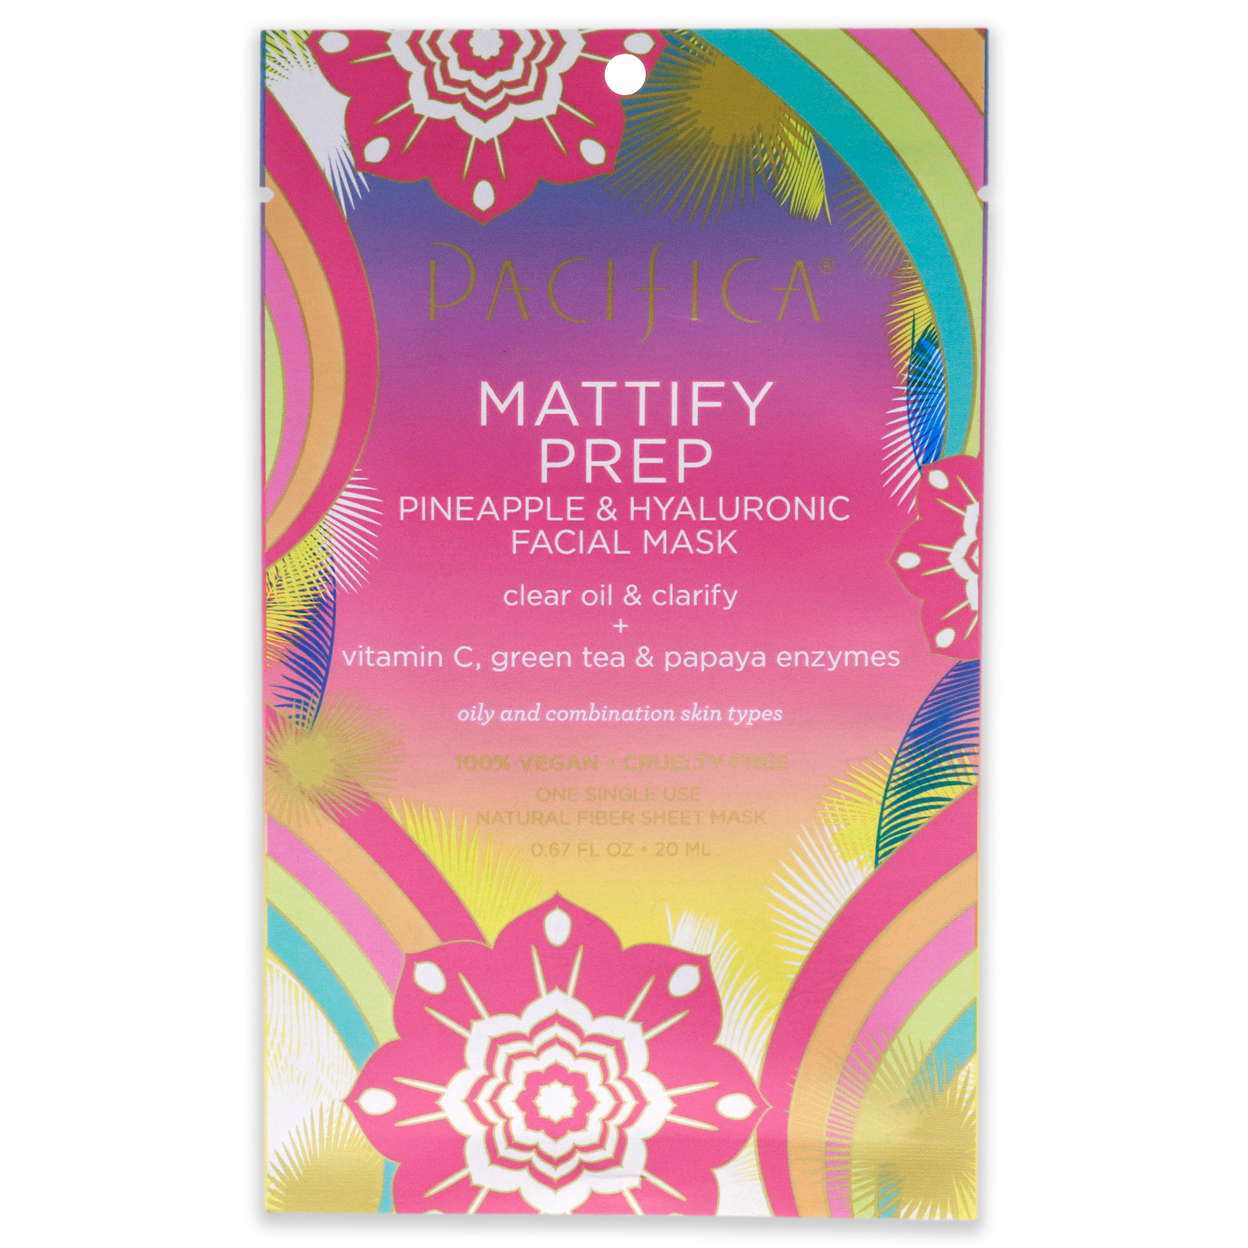 Pacifica Mattify Prep Pineapple And Hyaluronic Facial Mask 1 Pc